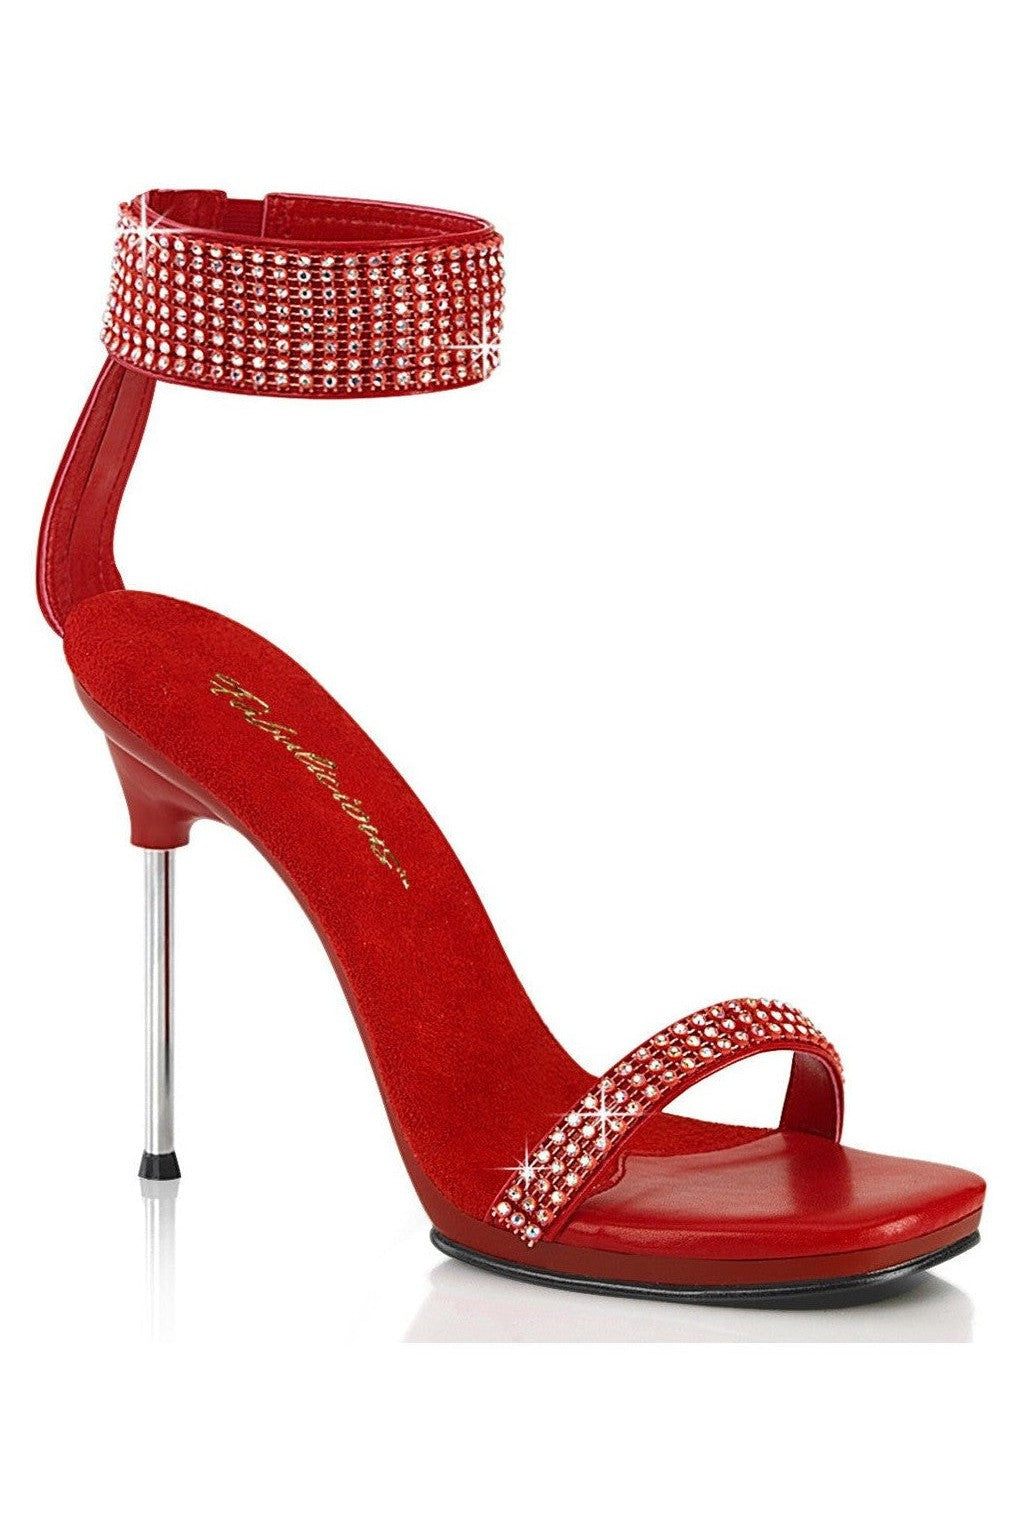 Fabulicious Red Sandals Platform Stripper Shoes | Buy at Sexyshoes.com